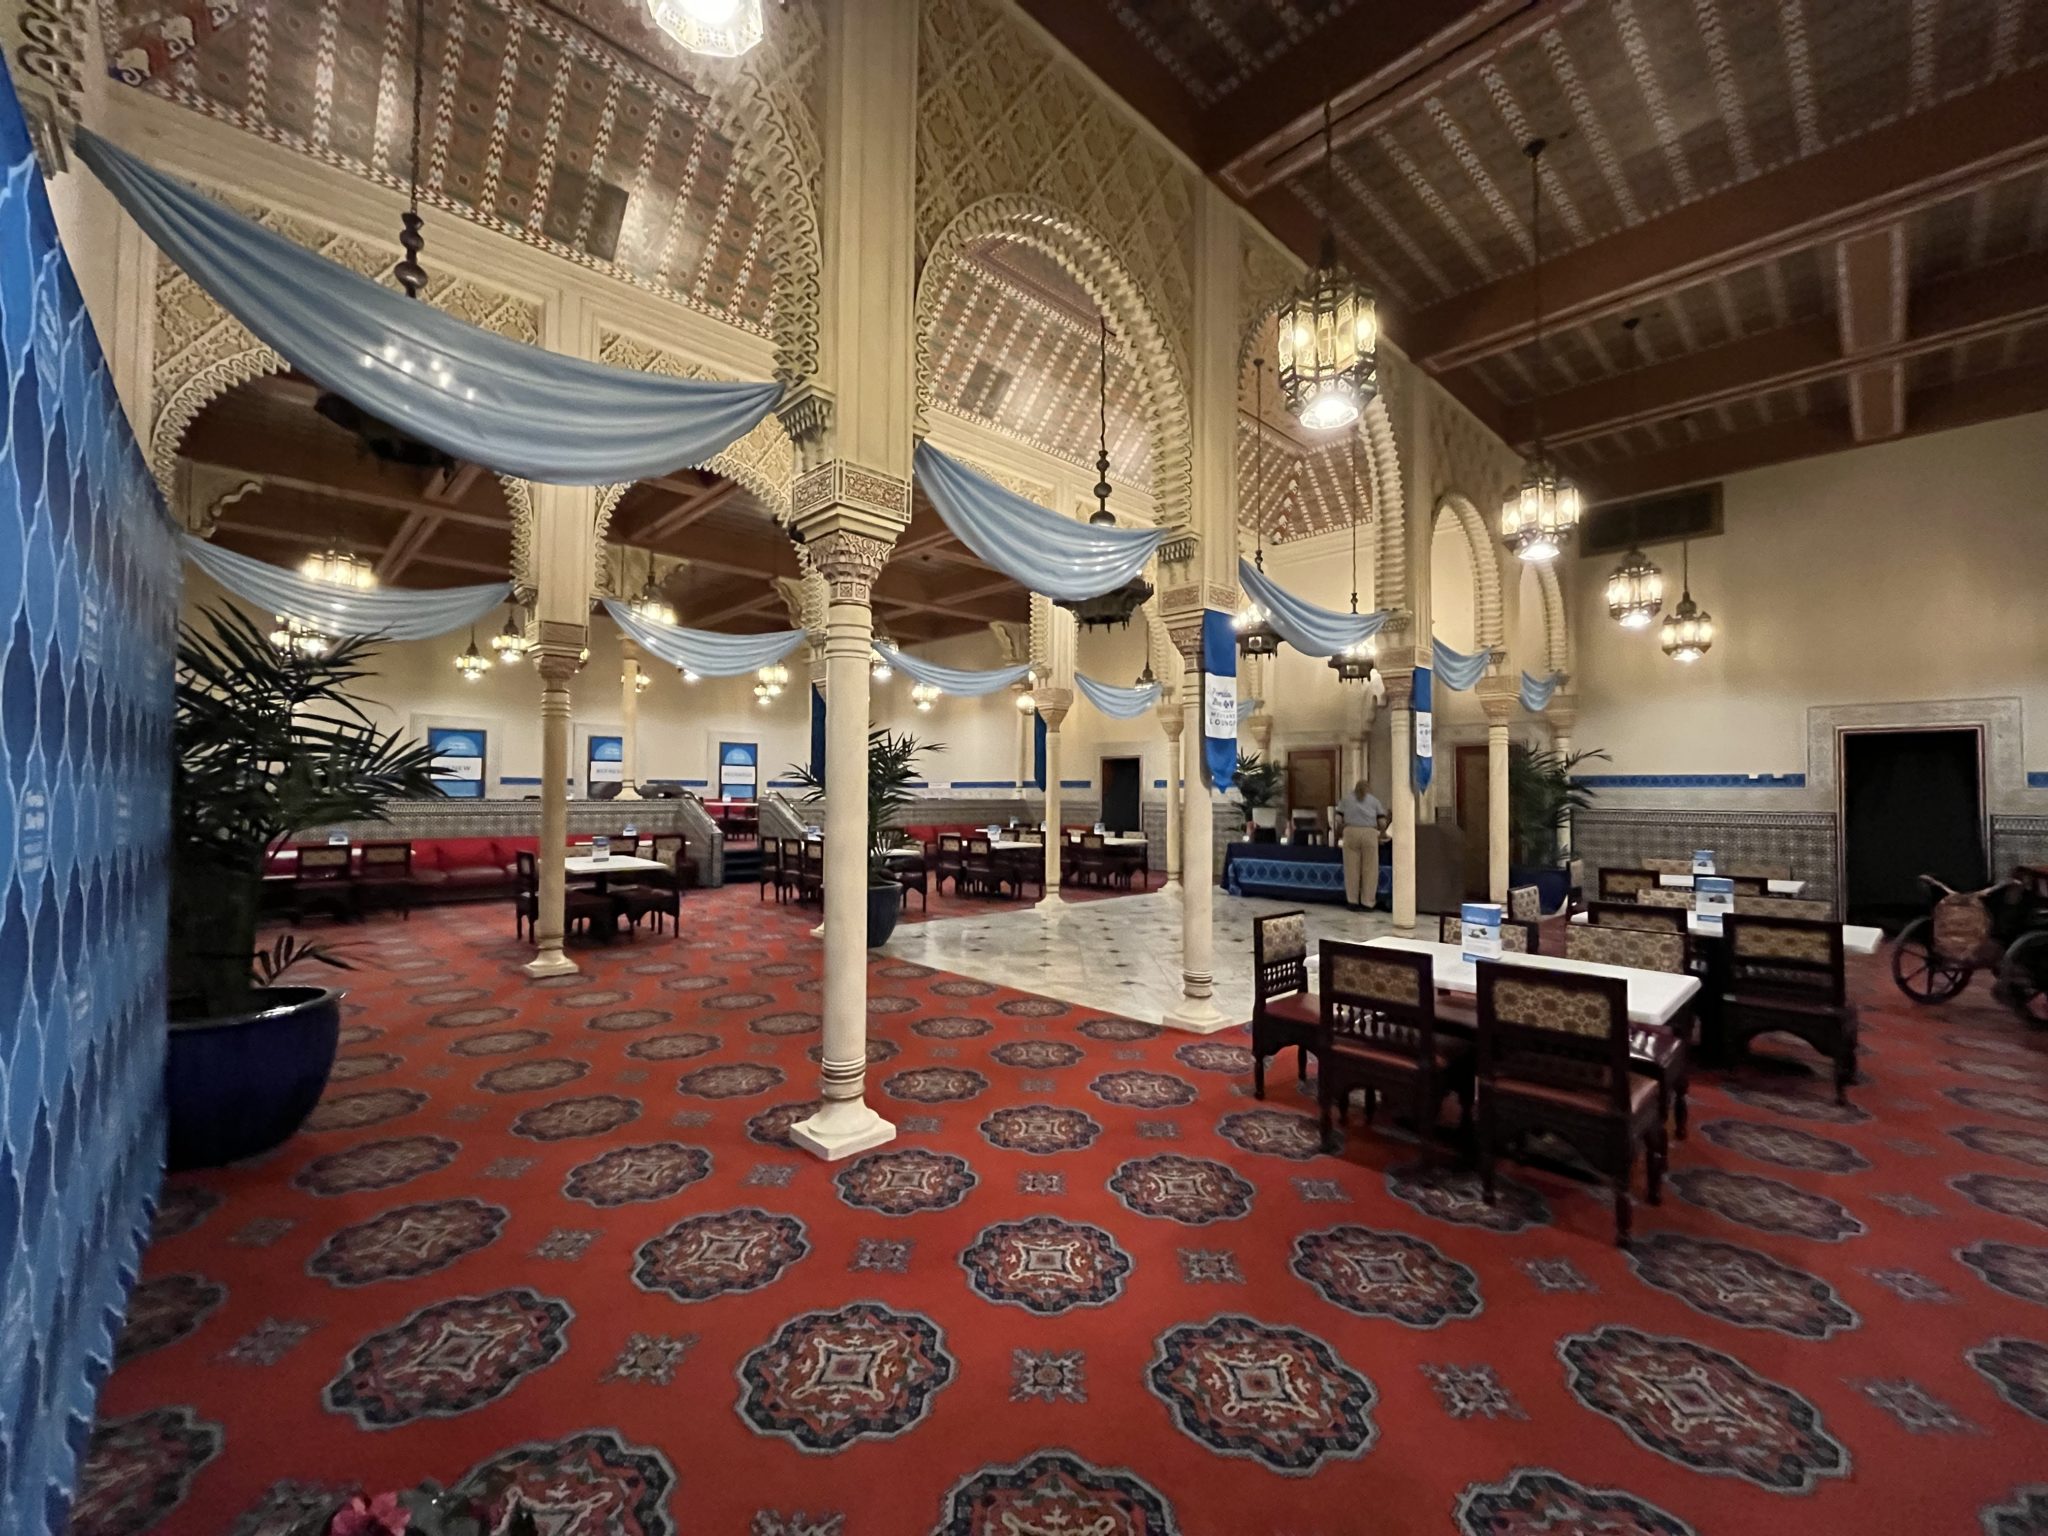 How to Score Guest Access to Florida Blue's Lounge in Epcot